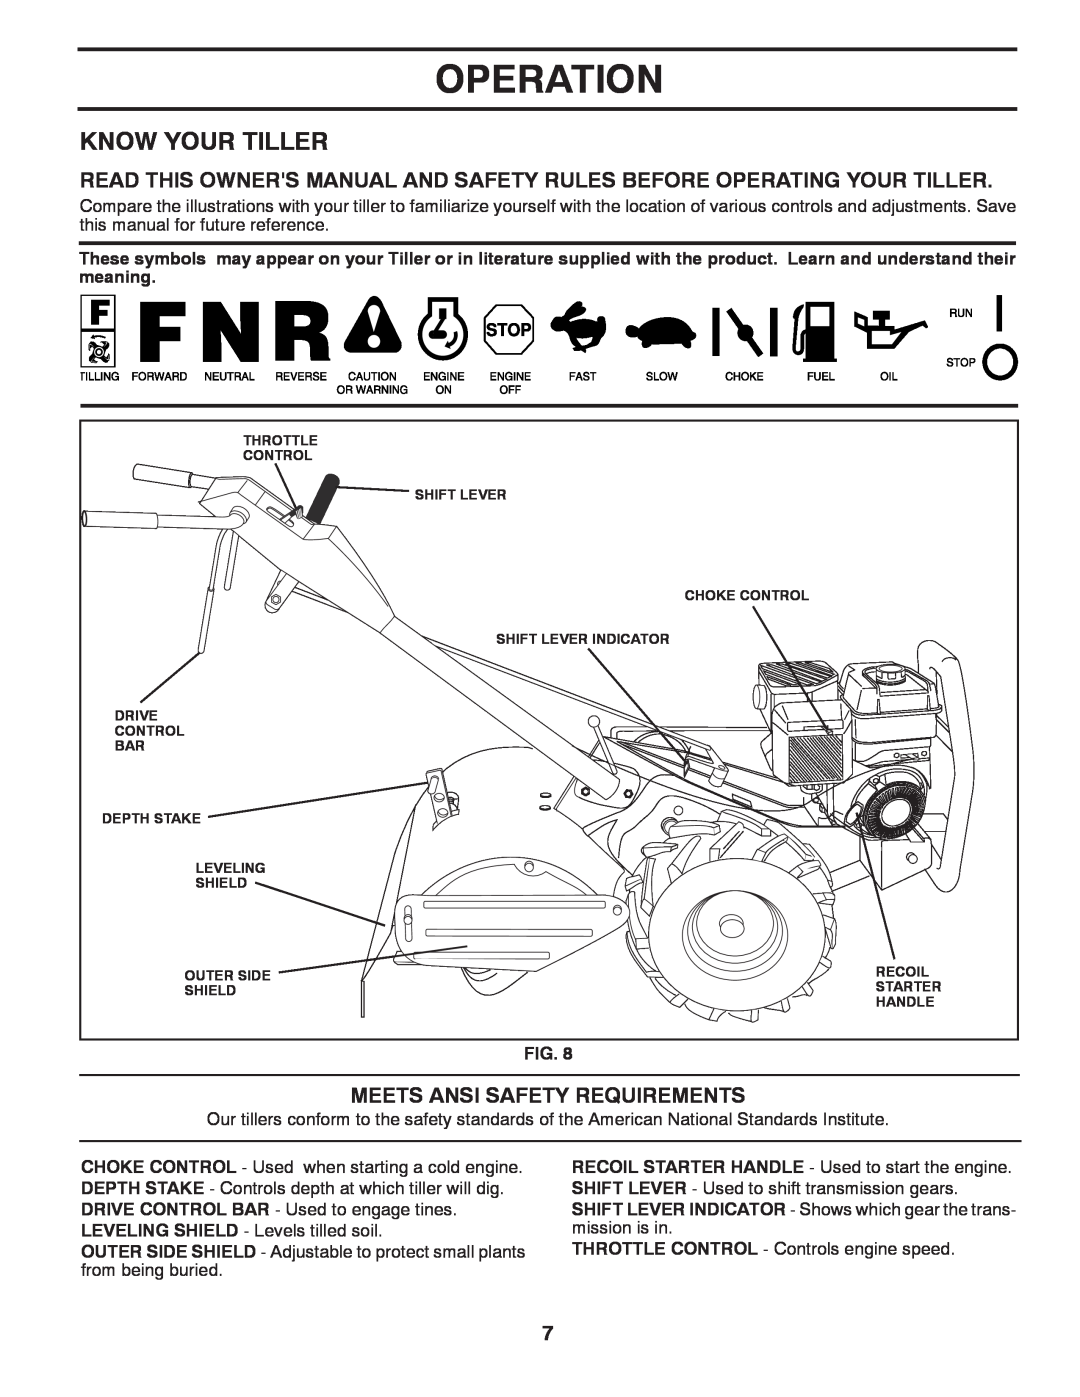 Poulan 96092001500, 418121 manual Operation, Know Your Tiller, Meets Ansi Safety Requirements 